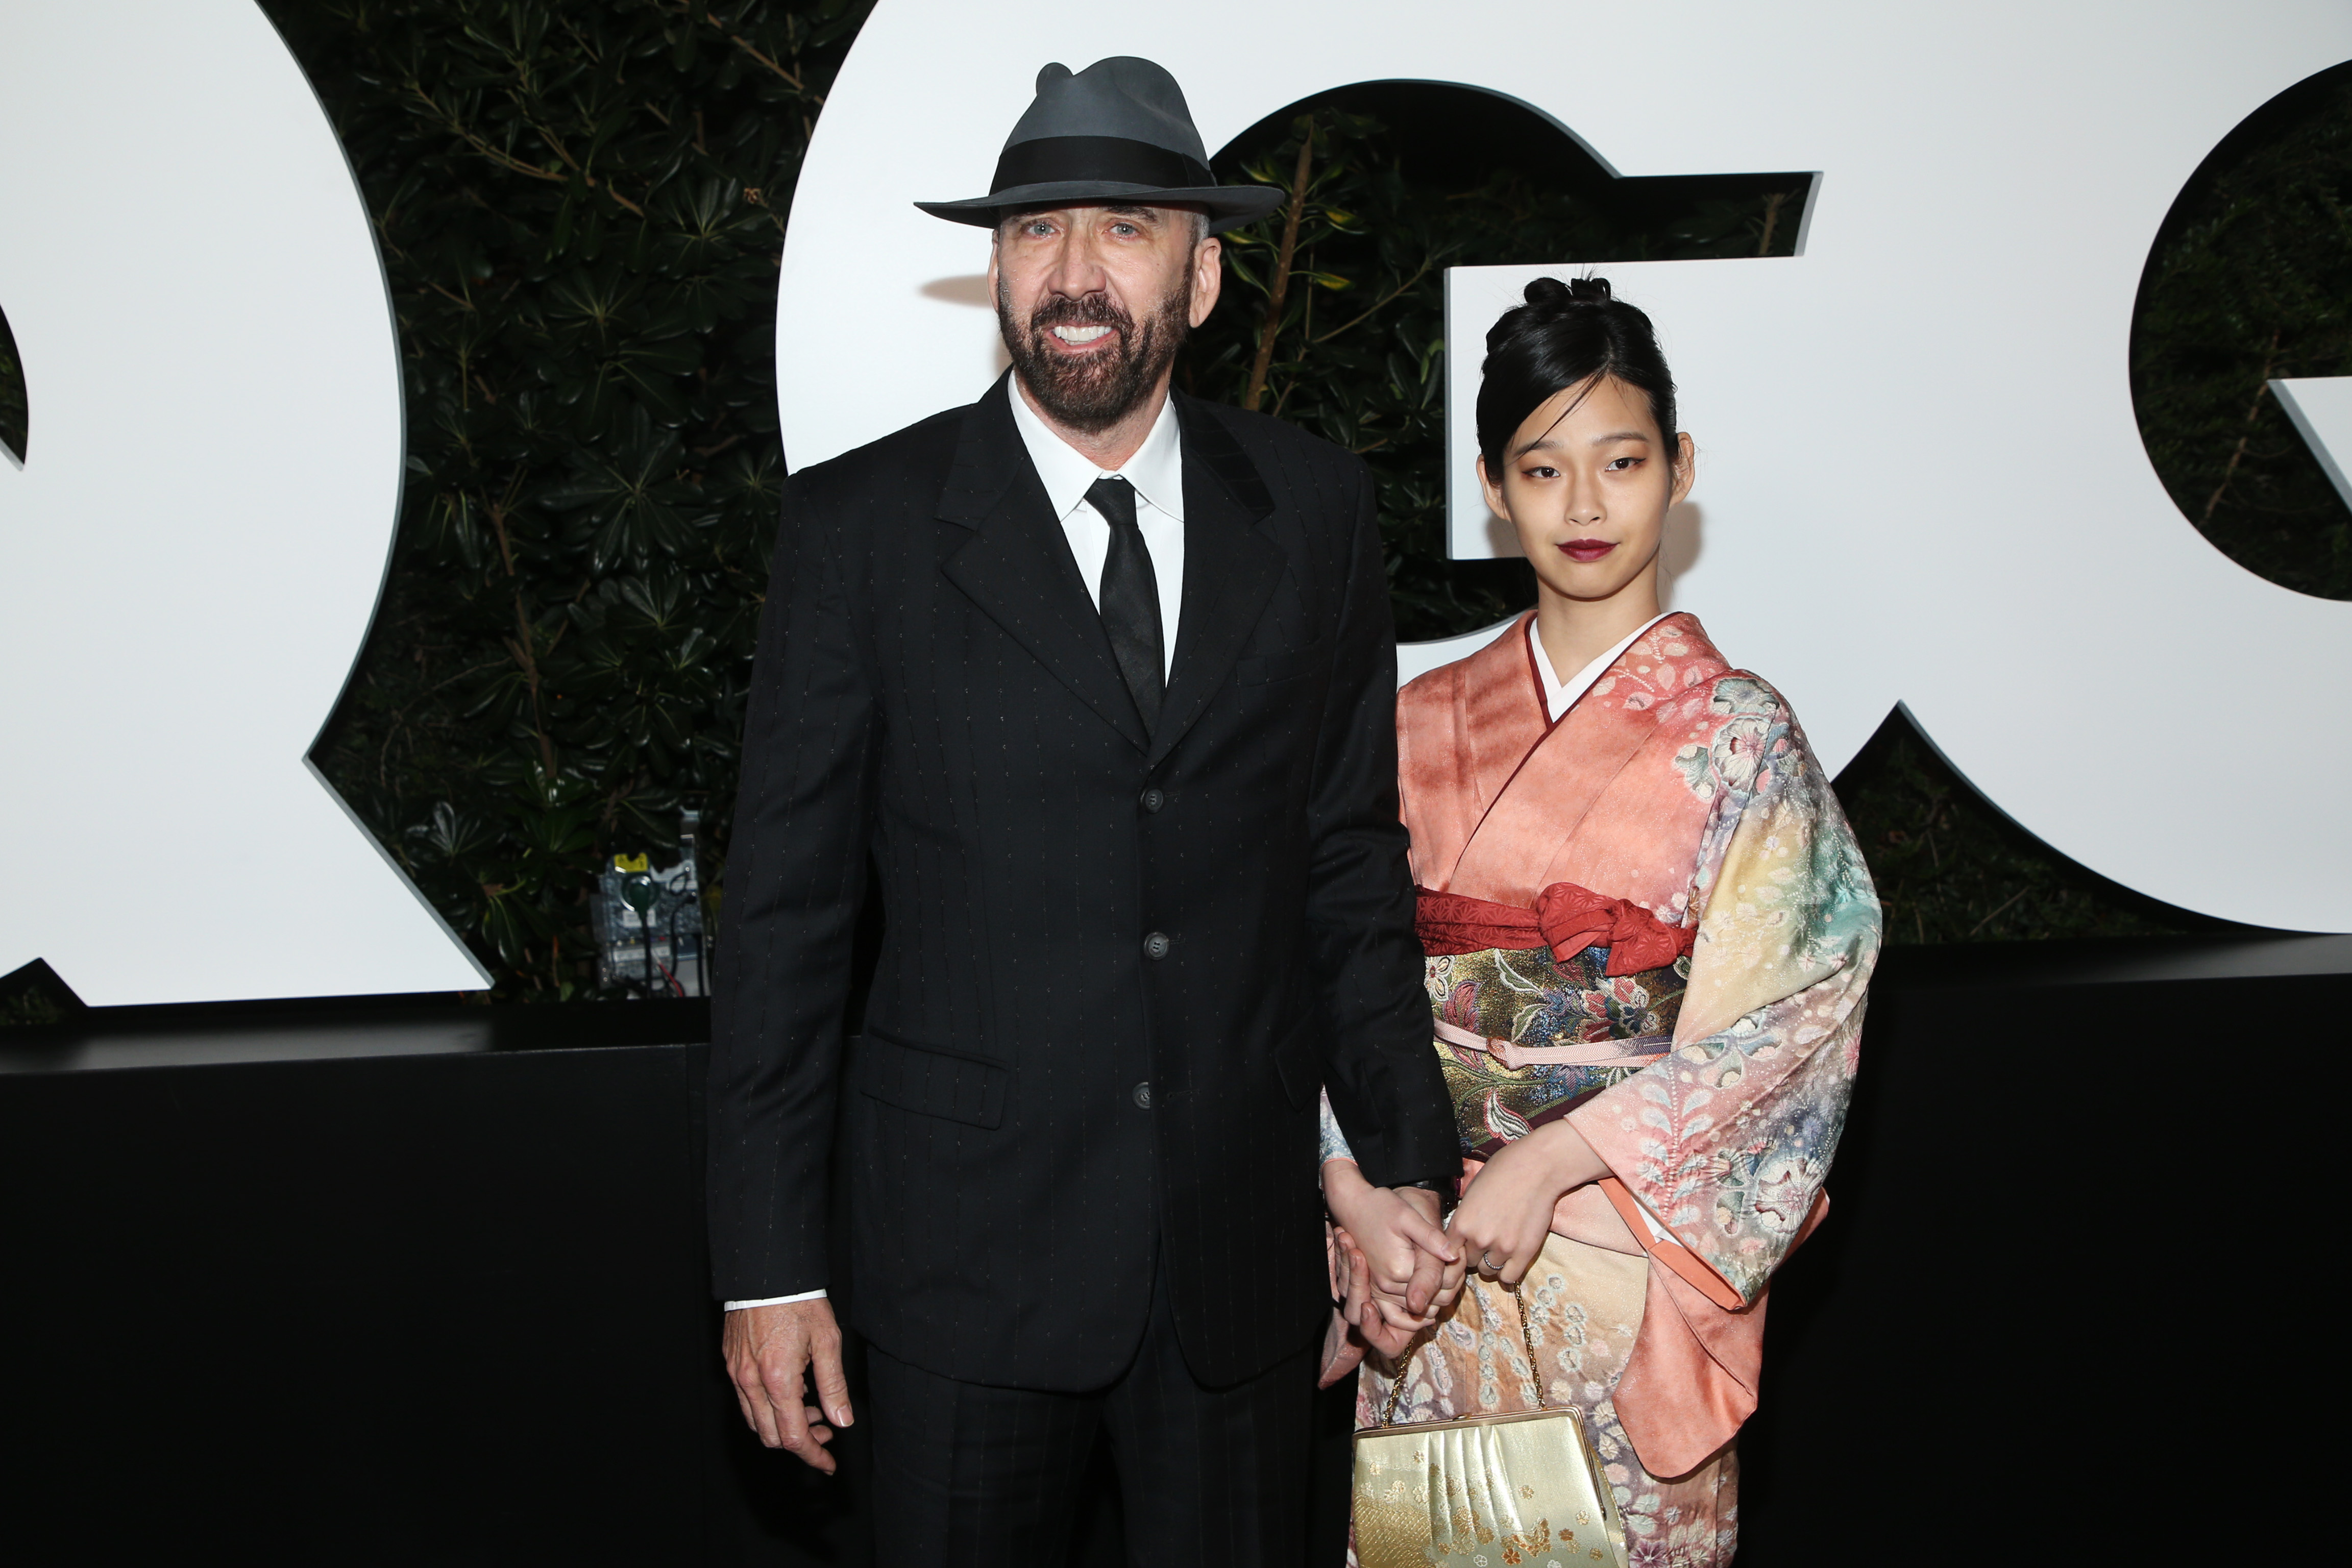 Nicholas Cage and Riko Shibata at the GQ Men of The Year Celebration on November 18, 2021, in West Hollywood, California | Source: Getty Images